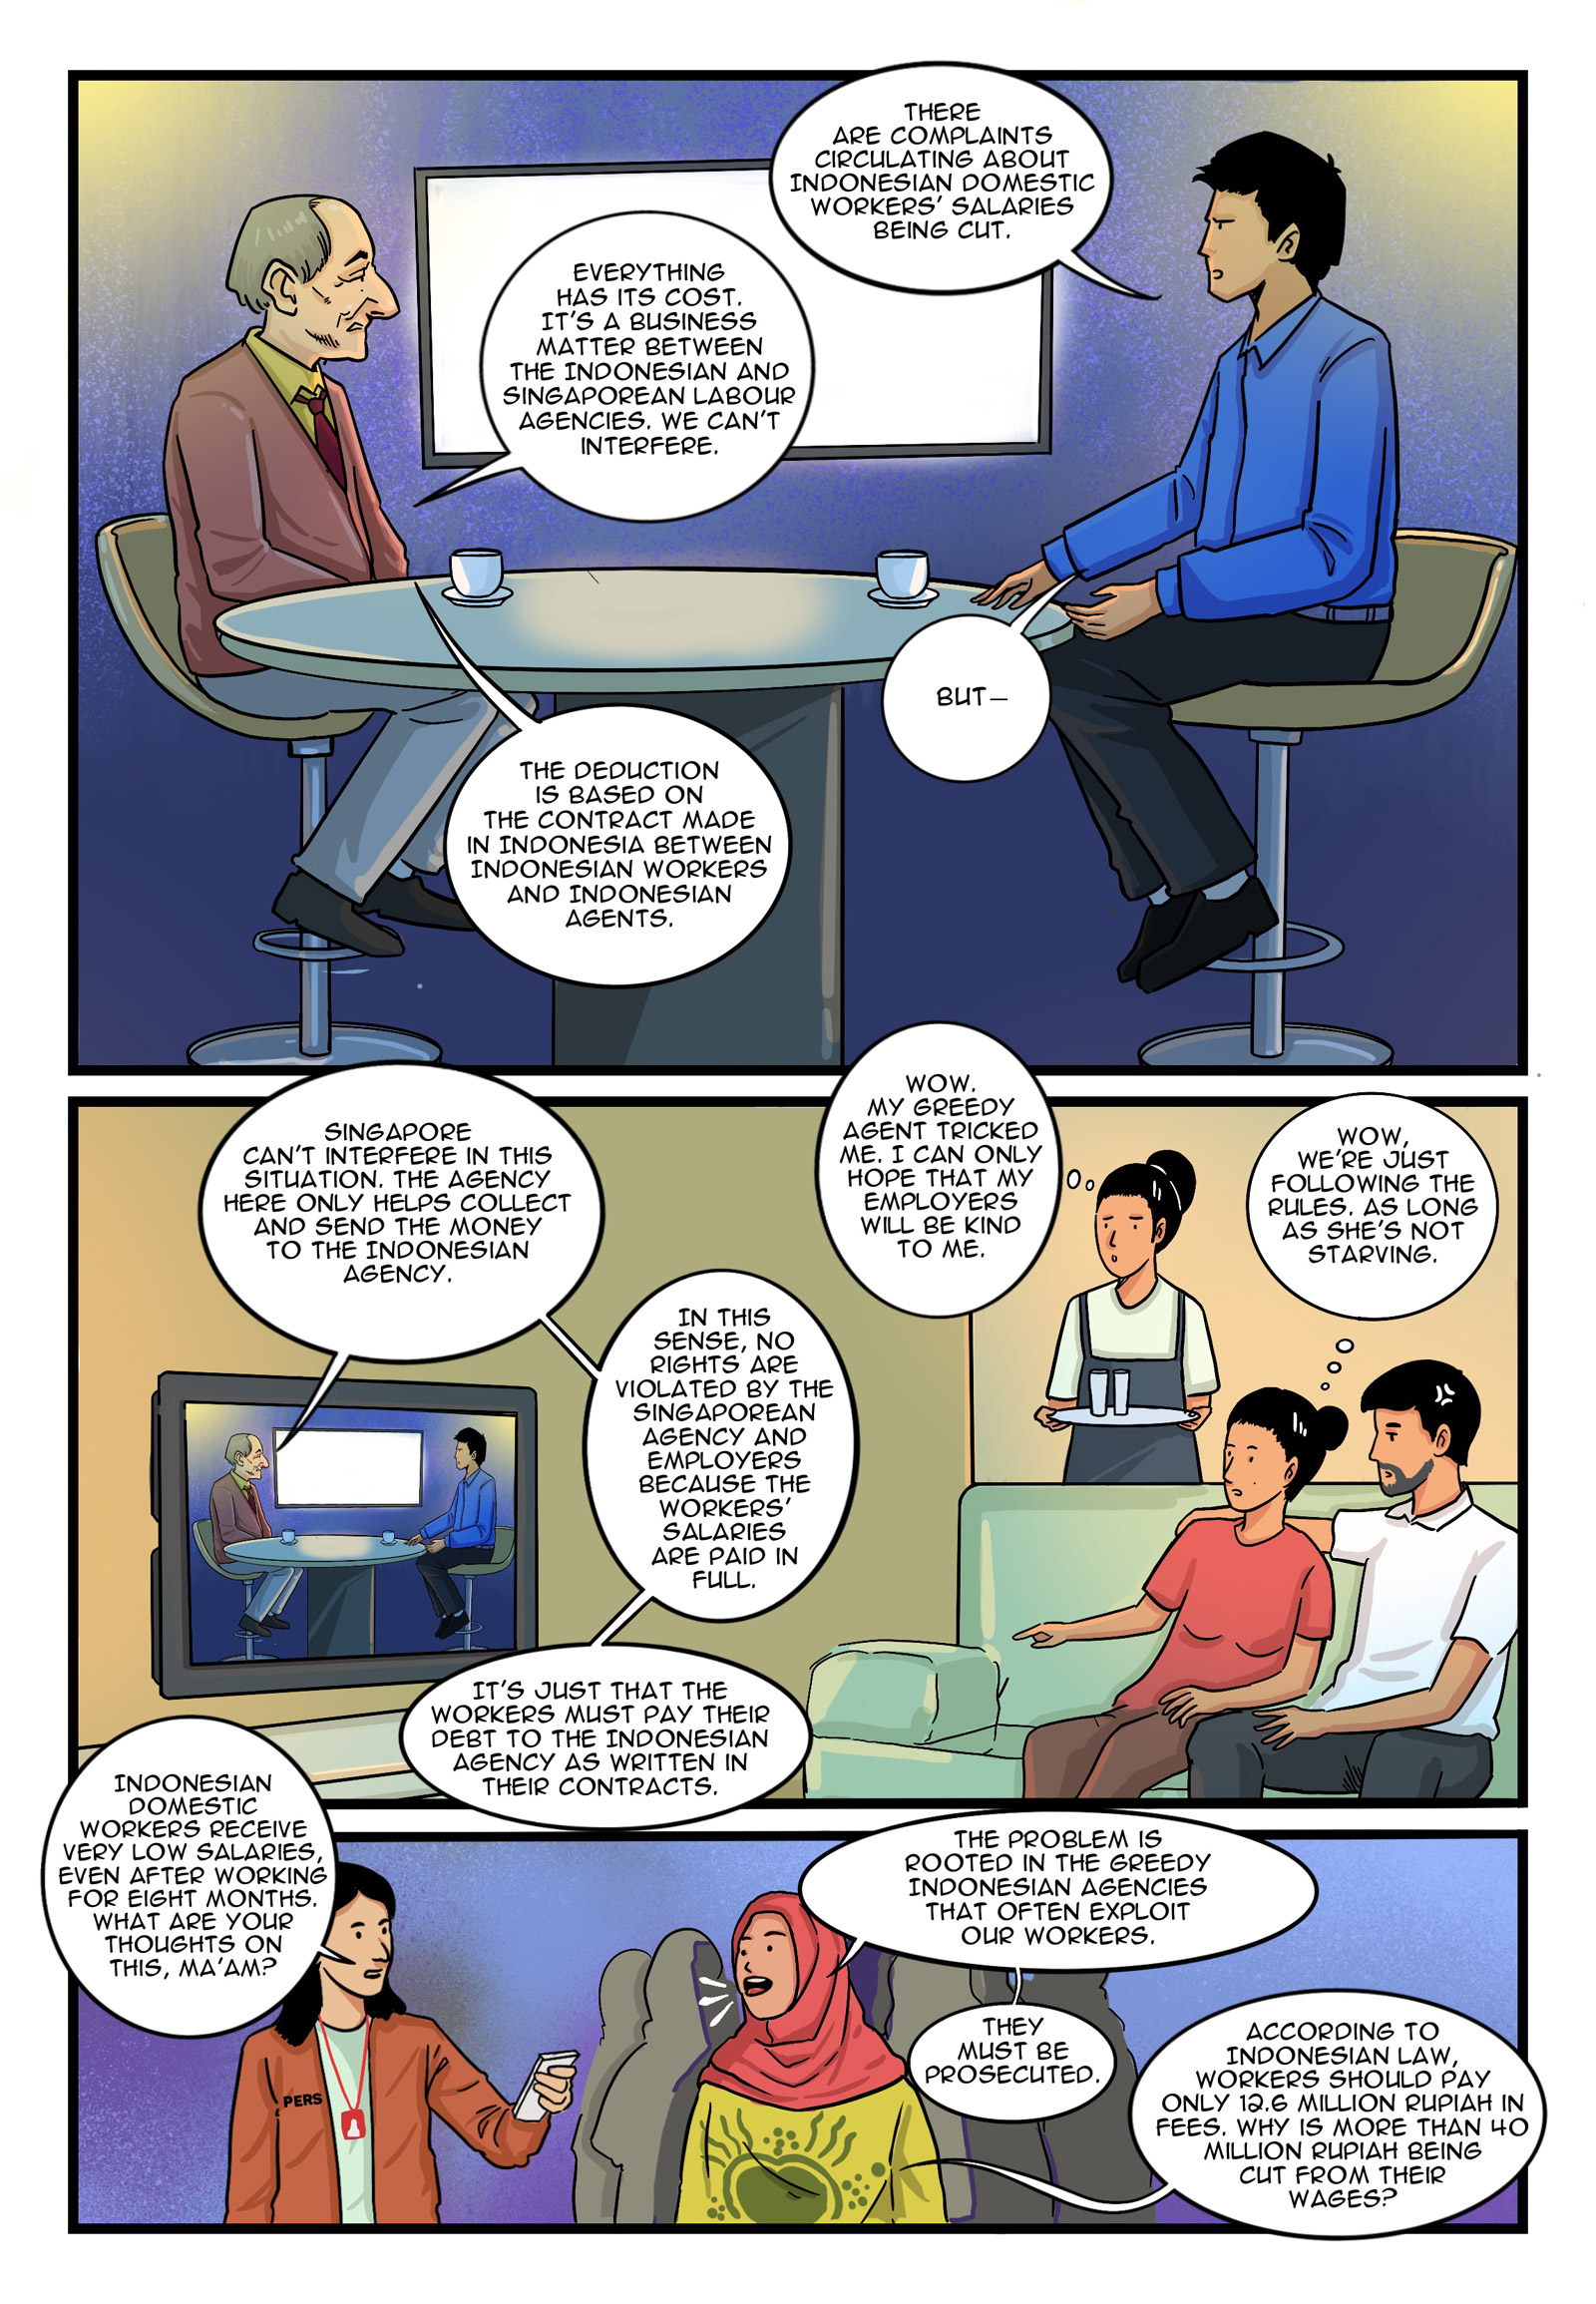 Page 9.
Panel 1. Suryati and her employers are watching an interview about migrant workers whose salaries are unfairly cut by their agents. News Anchor: “There are complaints circulating about Indonesian domestic workers’ salaries being cut.” Singaporean Official: “Everything has its cost. It’s a business matter between the Indonesian and Singaporean labour agencies. We can’t interfere.” News Anchor: “But—” Singaporean Official: “The deduction is based on the contract made in Indonesia between Indonesian workers and Indonesian agents.”

Panel 2. Singaporean Official: “Singapore can’t interfere in this situation. The agency here only helps collect and send the money to the Indonesian agency. In this sense, no rights are violated by the Singaporean agency and employers because the workers’ salaries are paid in full. It’s just that the workers must pay their debt to the Indonesian agency as written in their contracts.” Suryati thinks to herself: “Wow. My greedy agent tricked me. I can only hope that my employers will be kind to me.” Employers think to themselves: “Wow, we’re just following the rules. As long as she’s not starving.”

Panel 3. Suryati and her employers are watching an interview of an Indonesian activist on the same show. Journalist: “Indonesian domestic workers receive very low salaries, even after working for eight months. What are your thoughts on this, ma’am?” Indonesian Activist: “The problem is rooted in the greedy Indonesian agencies that often exploit our workers. They must be prosecuted. According to Indonesian law, workers should pay only 12.6 million rupiah in fees. Why is more than 40 million rupiah being cut from their wages?”
